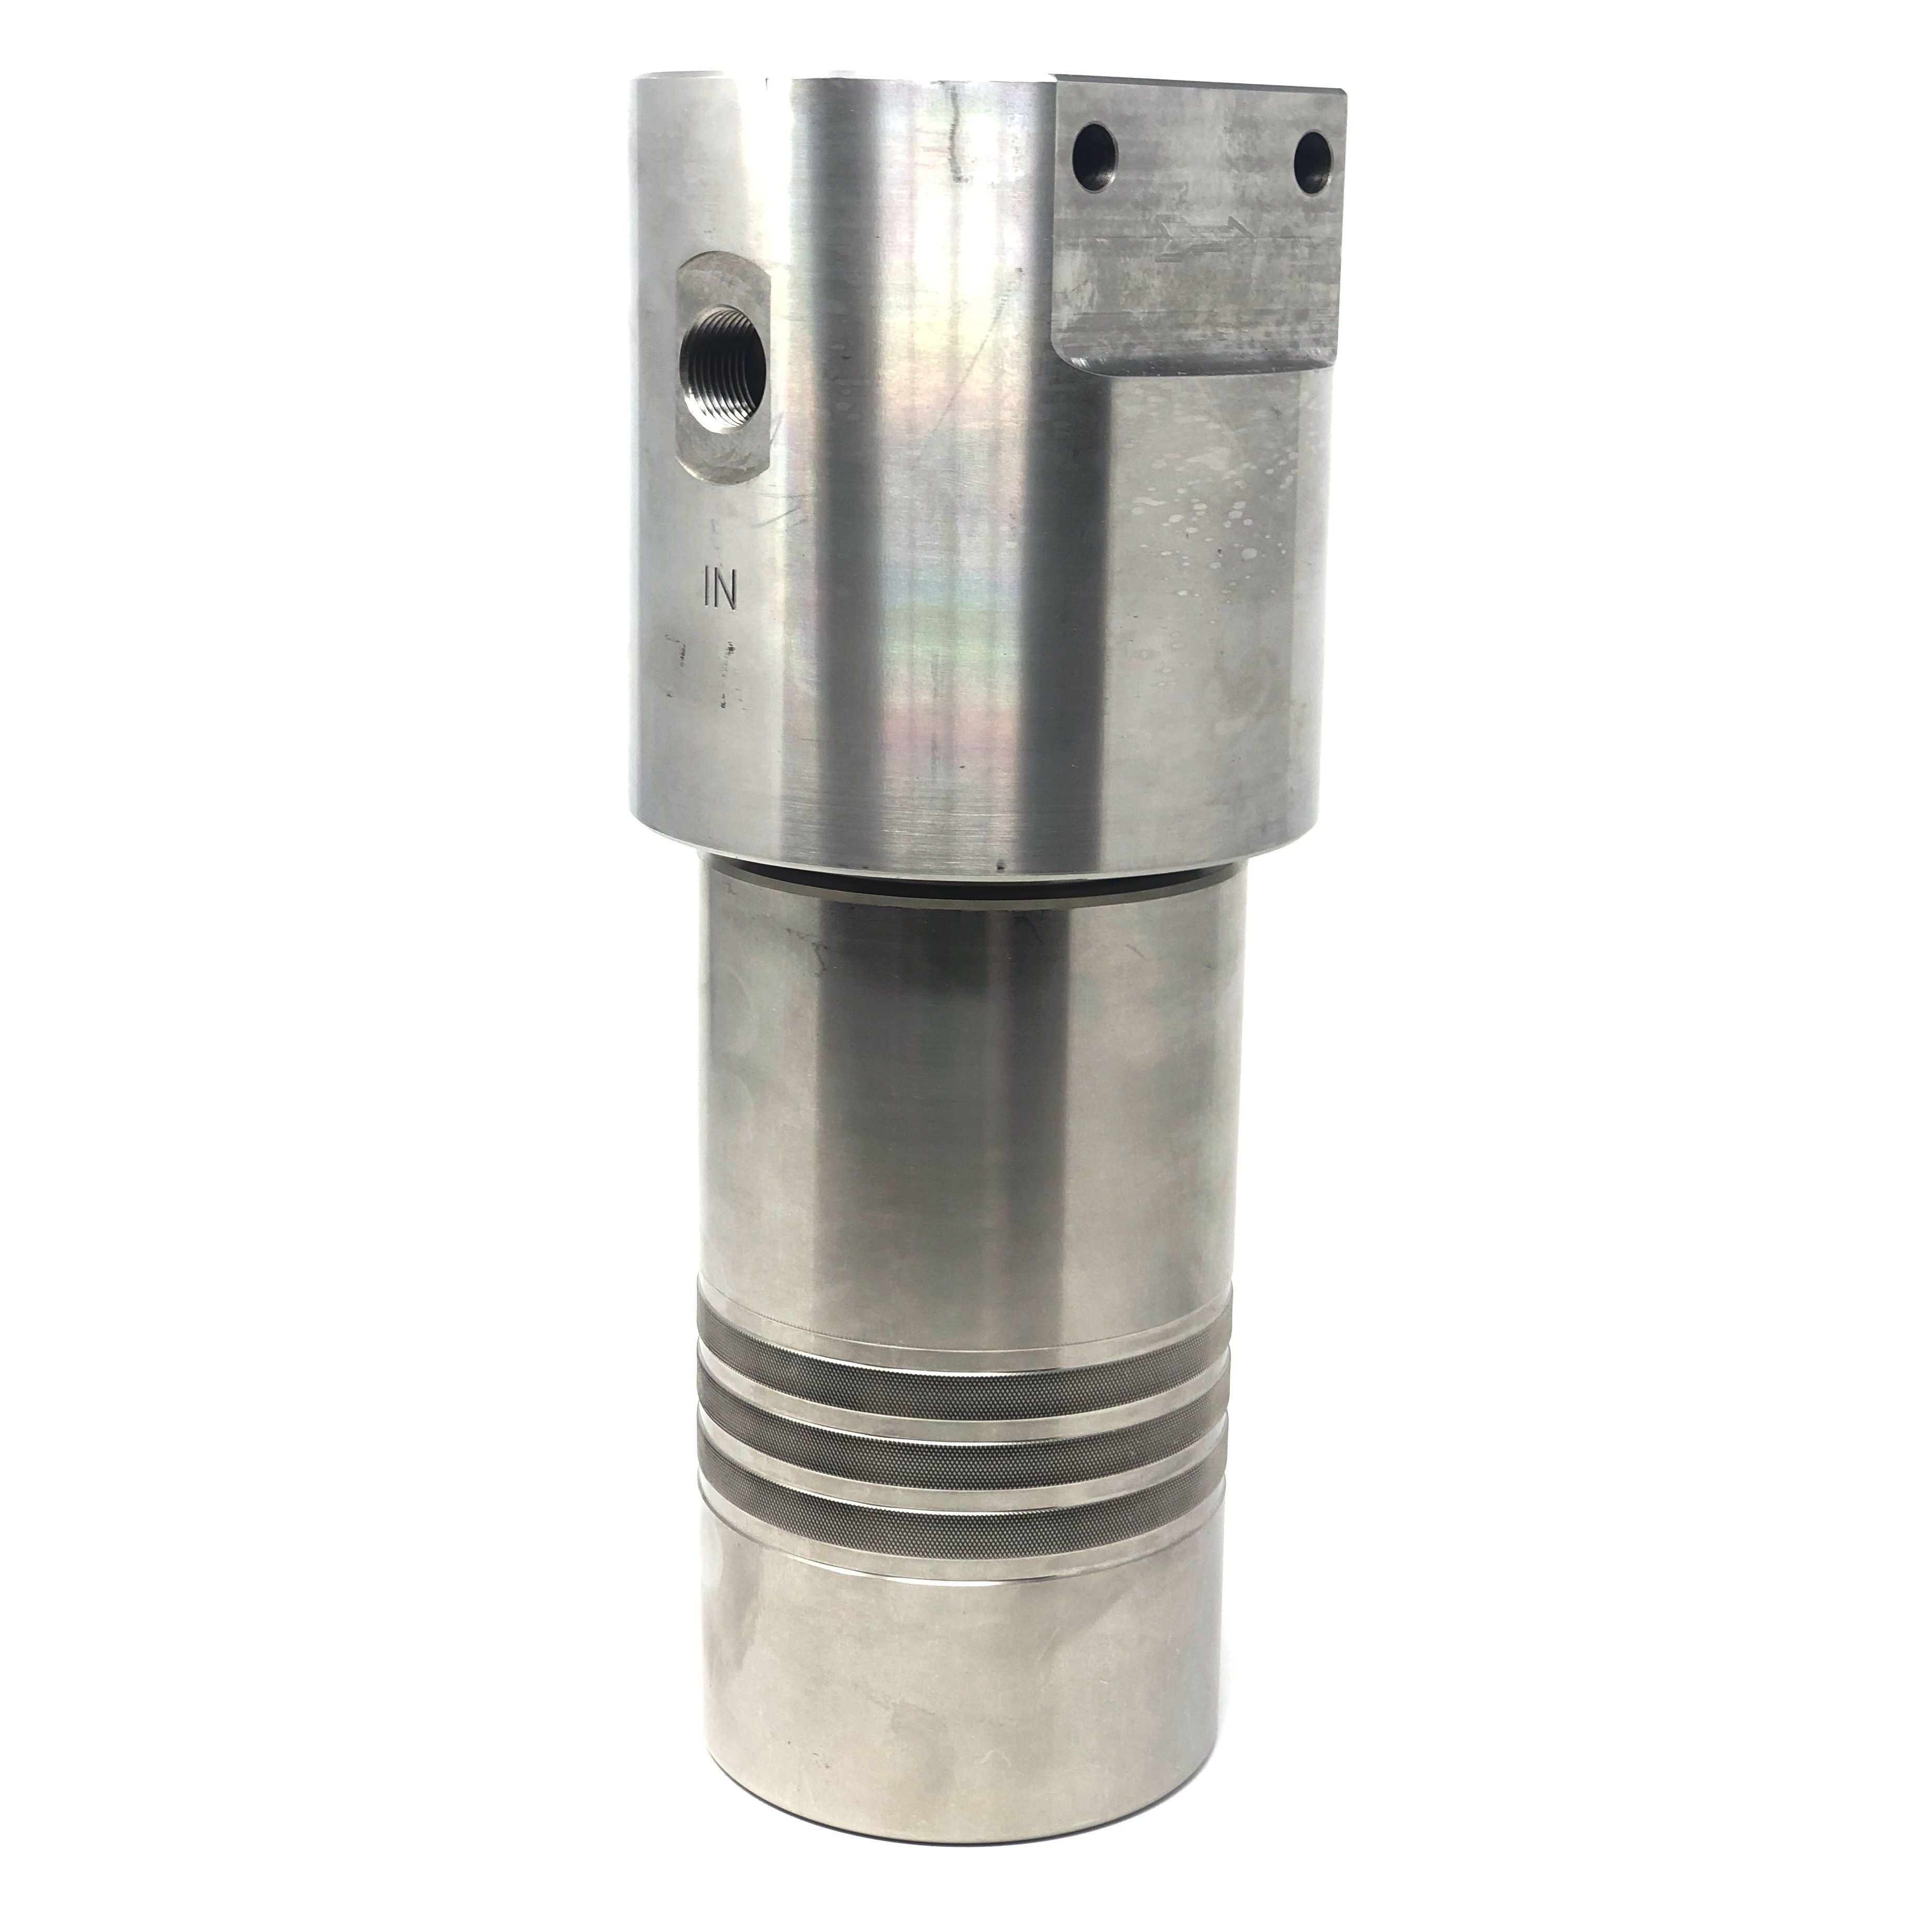 52S-246N-12MDN : Chase Ultra High Pressure Inline Filter, 10000psi, 3/8" NPT, 12 Micron, With Visual Indicator, No Bypass